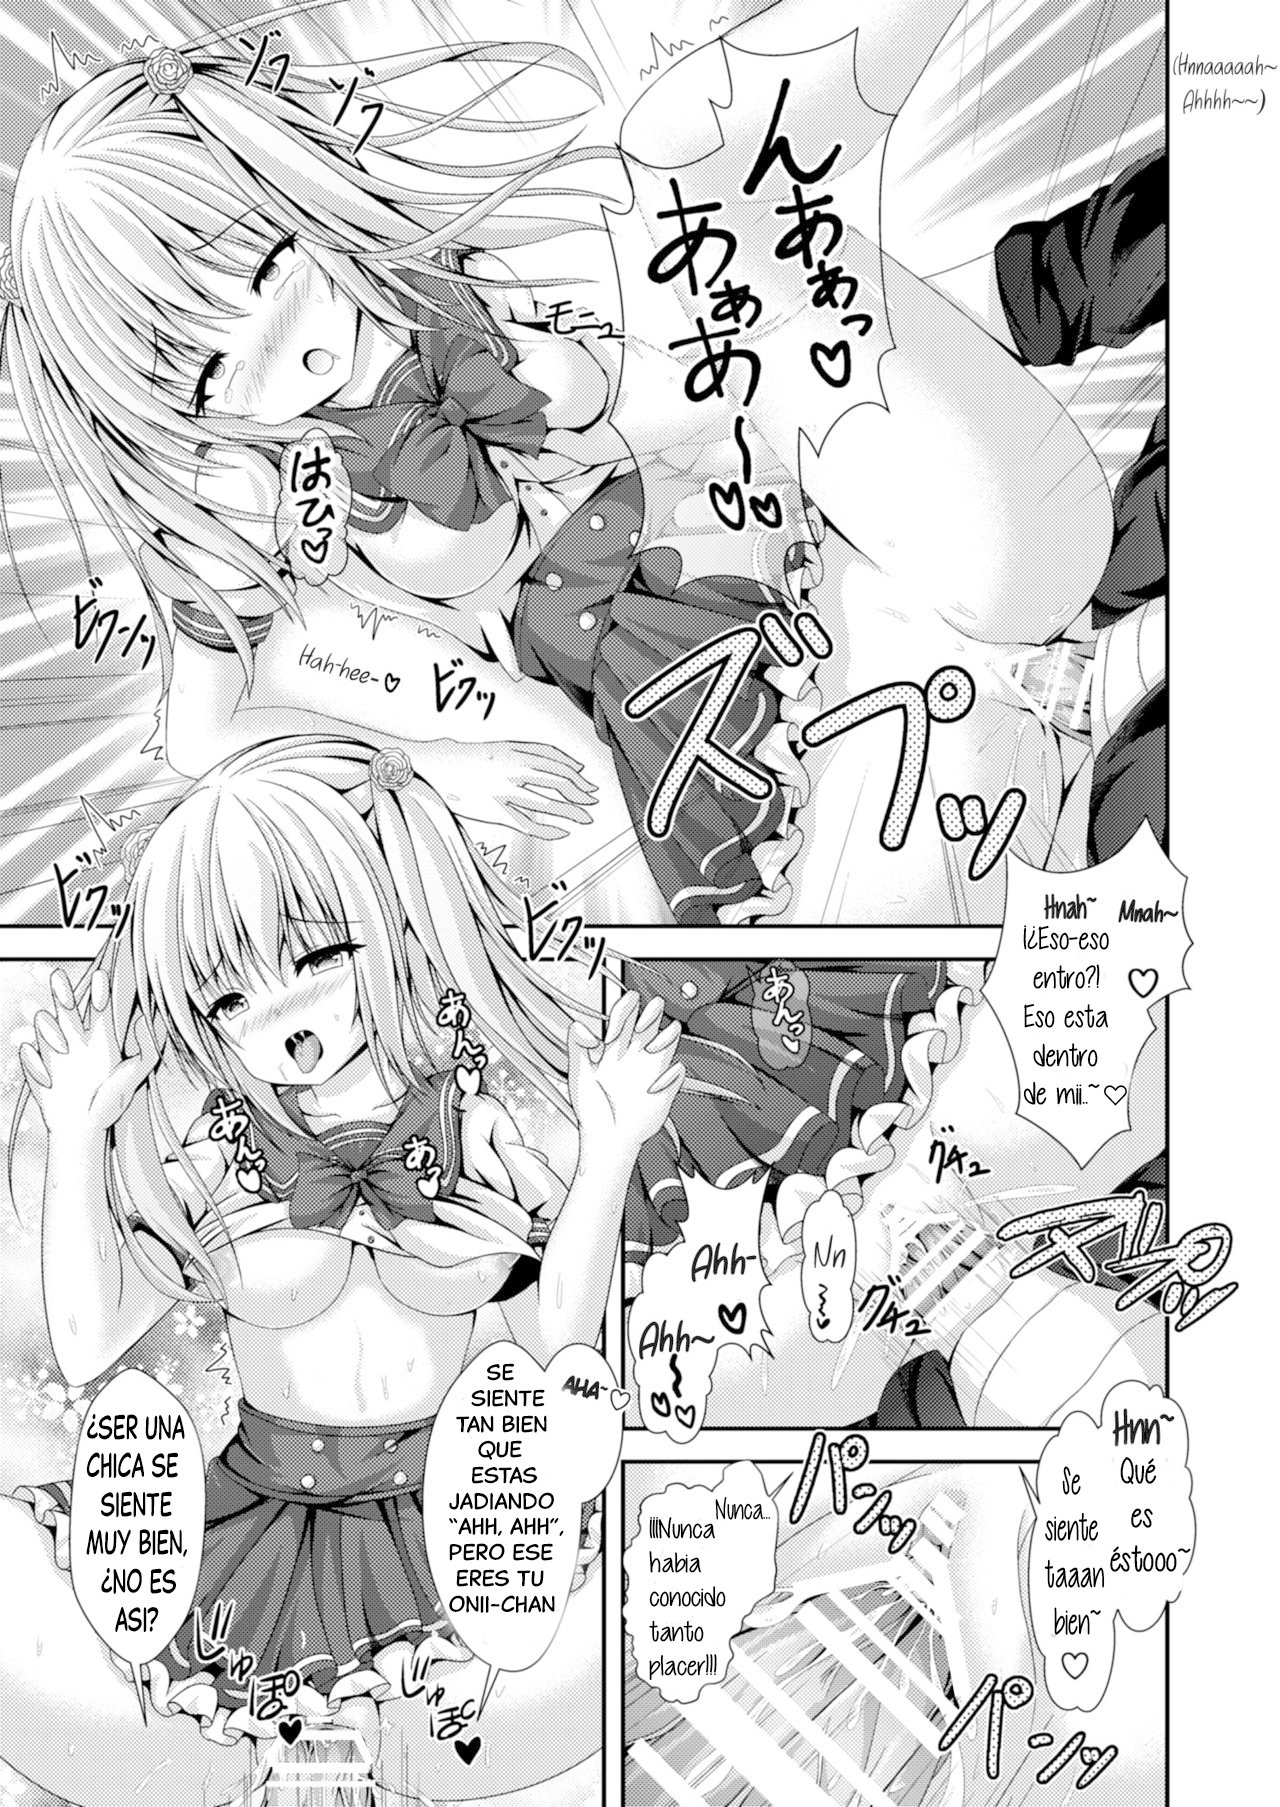 Switching Bodies With a Lewd Sister - 11